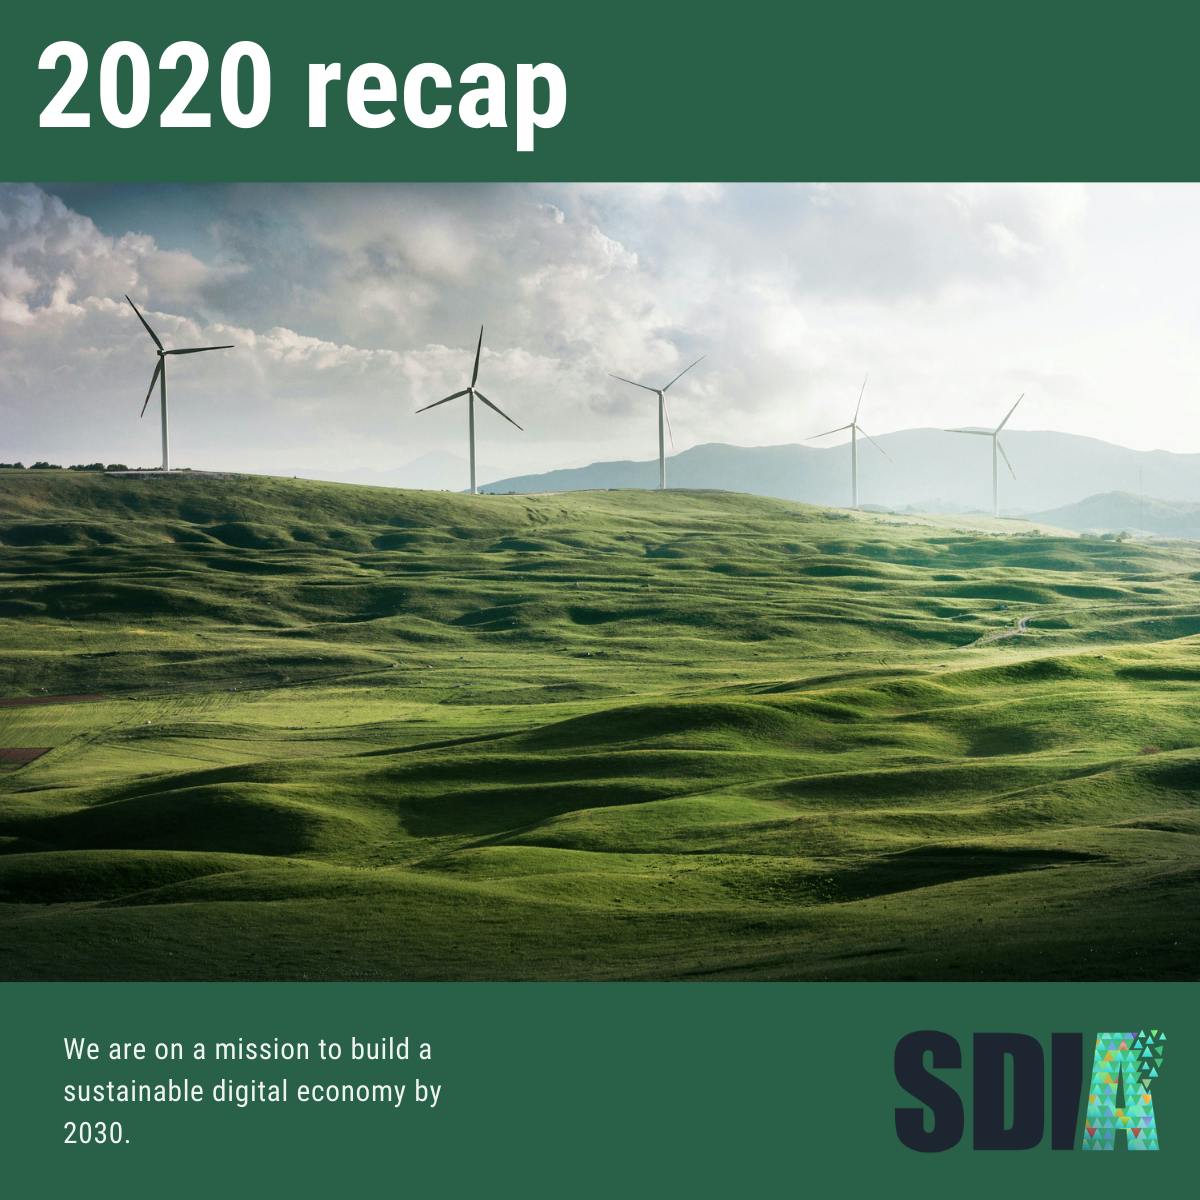 SDIA's year 2020 in review